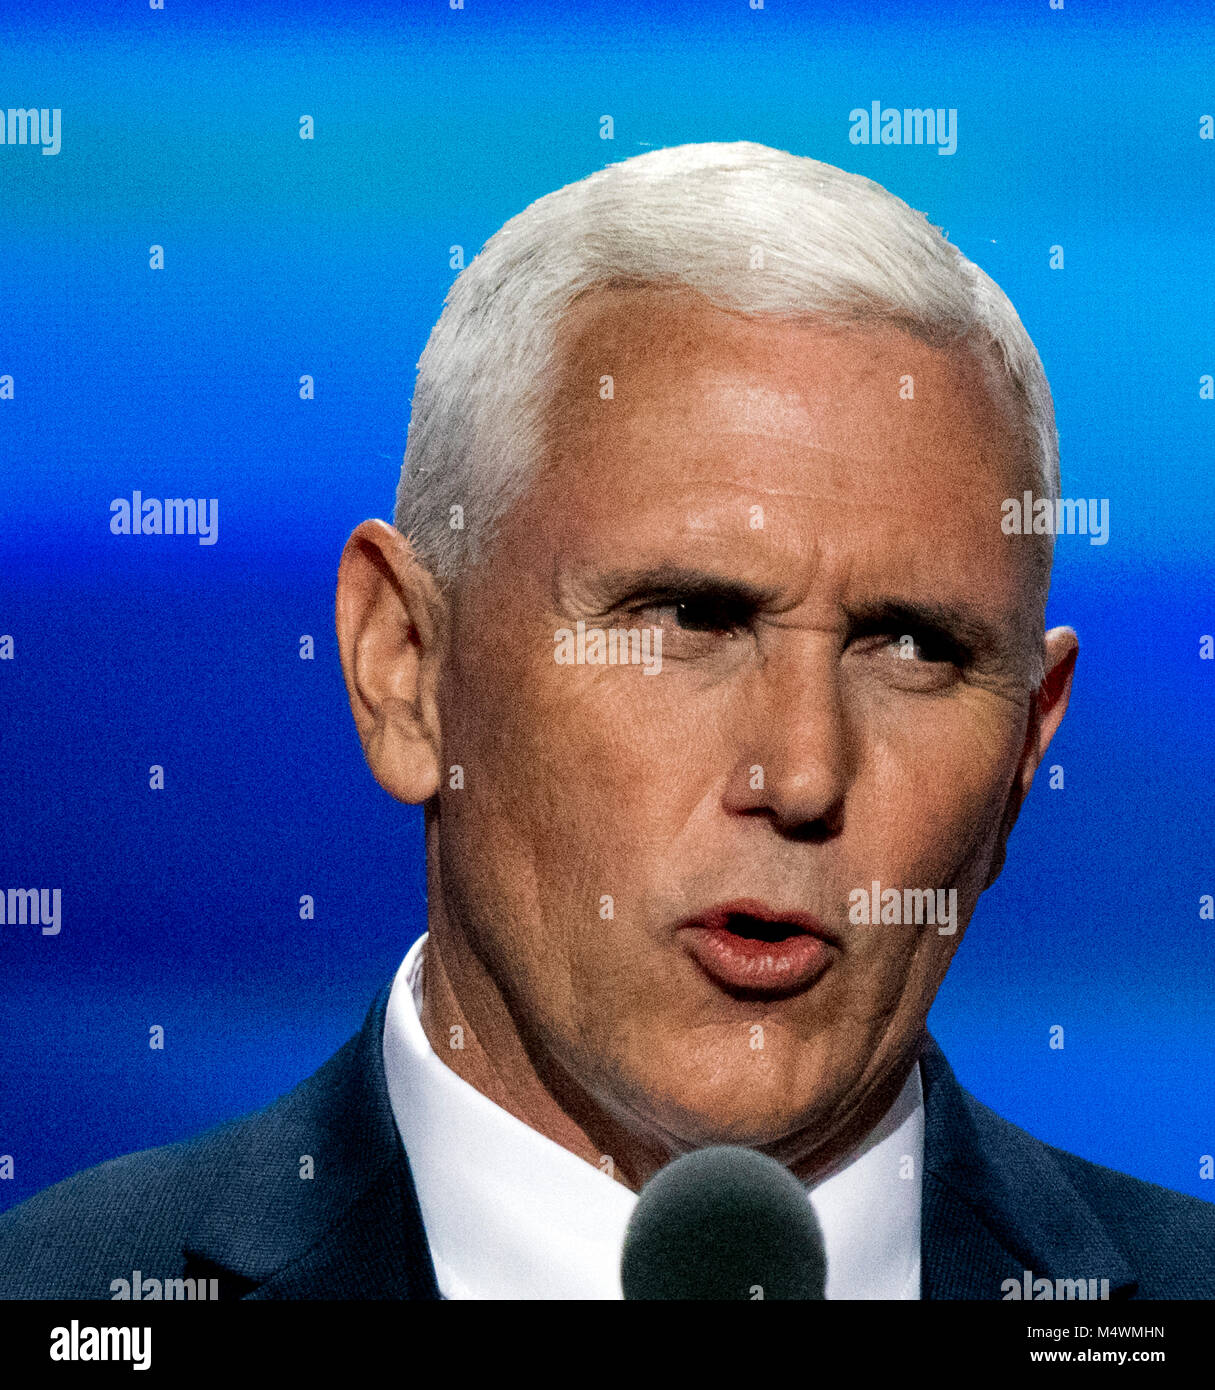 Cleveland Ohio, USA, 20th July, 2016. Republican Governor and now VIce-Presidential candidate Michael 'Mike' Pence addresses the Republican National Convention in the Quicken Arena. Stock Photo